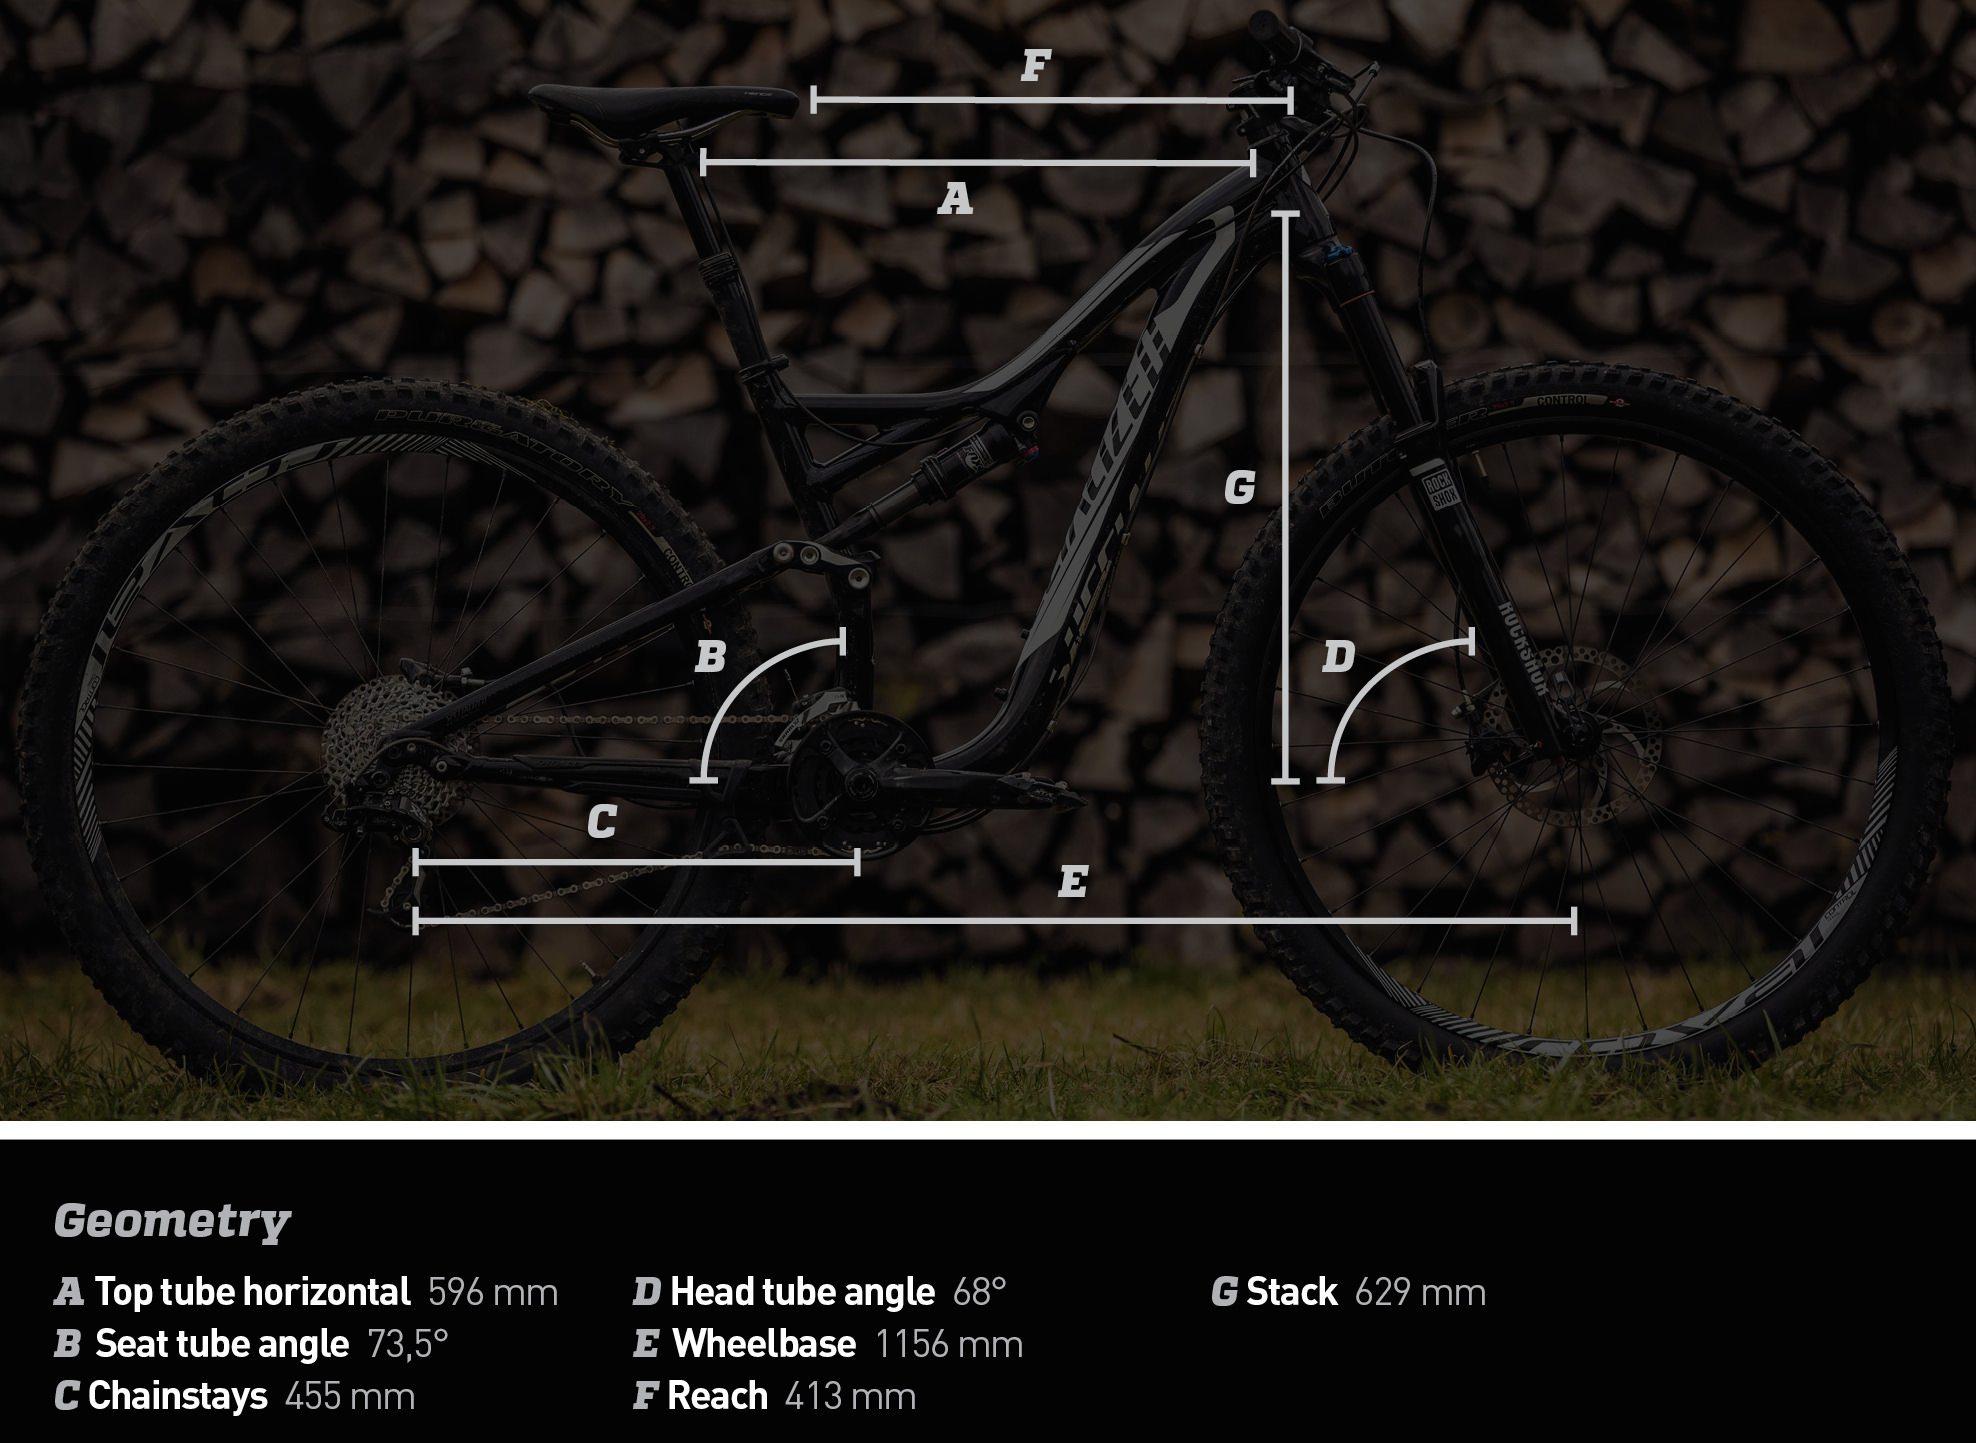 The Geometry of the Specialized Stumpjumper FSR Comp Evo 29.